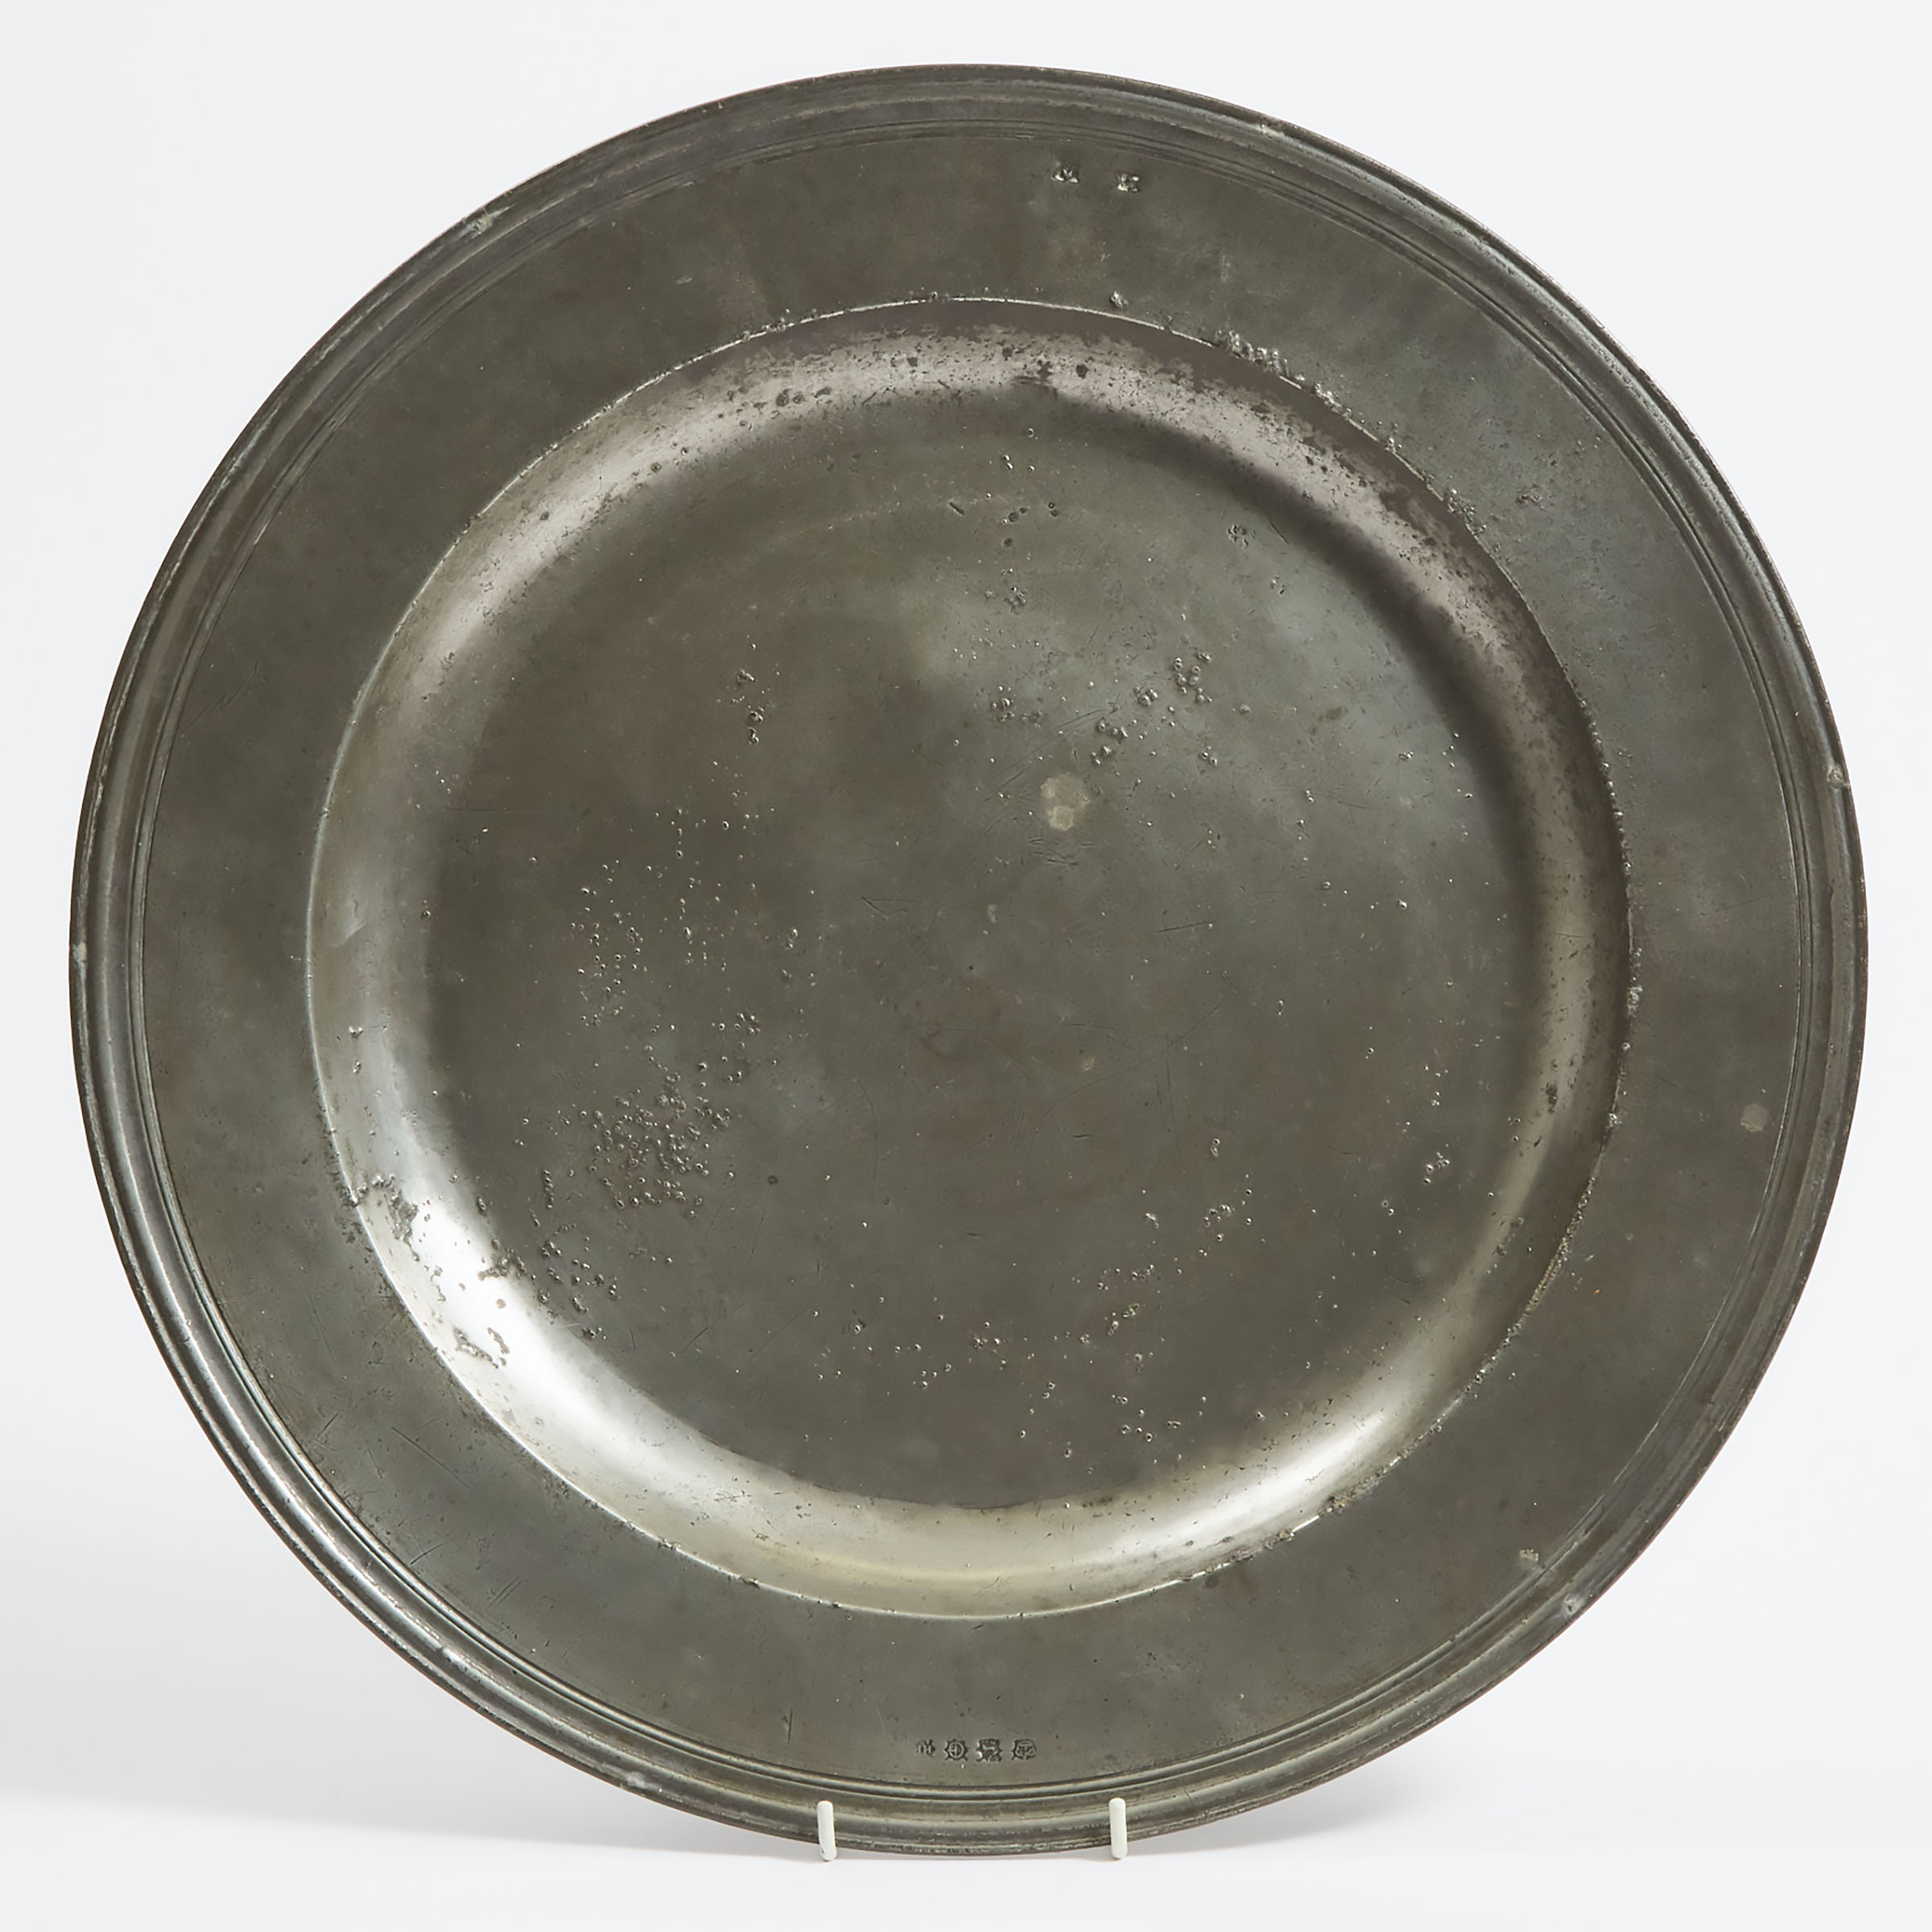 English Pewter Triple Reed Charger by H. Harford, London, 1673-1715